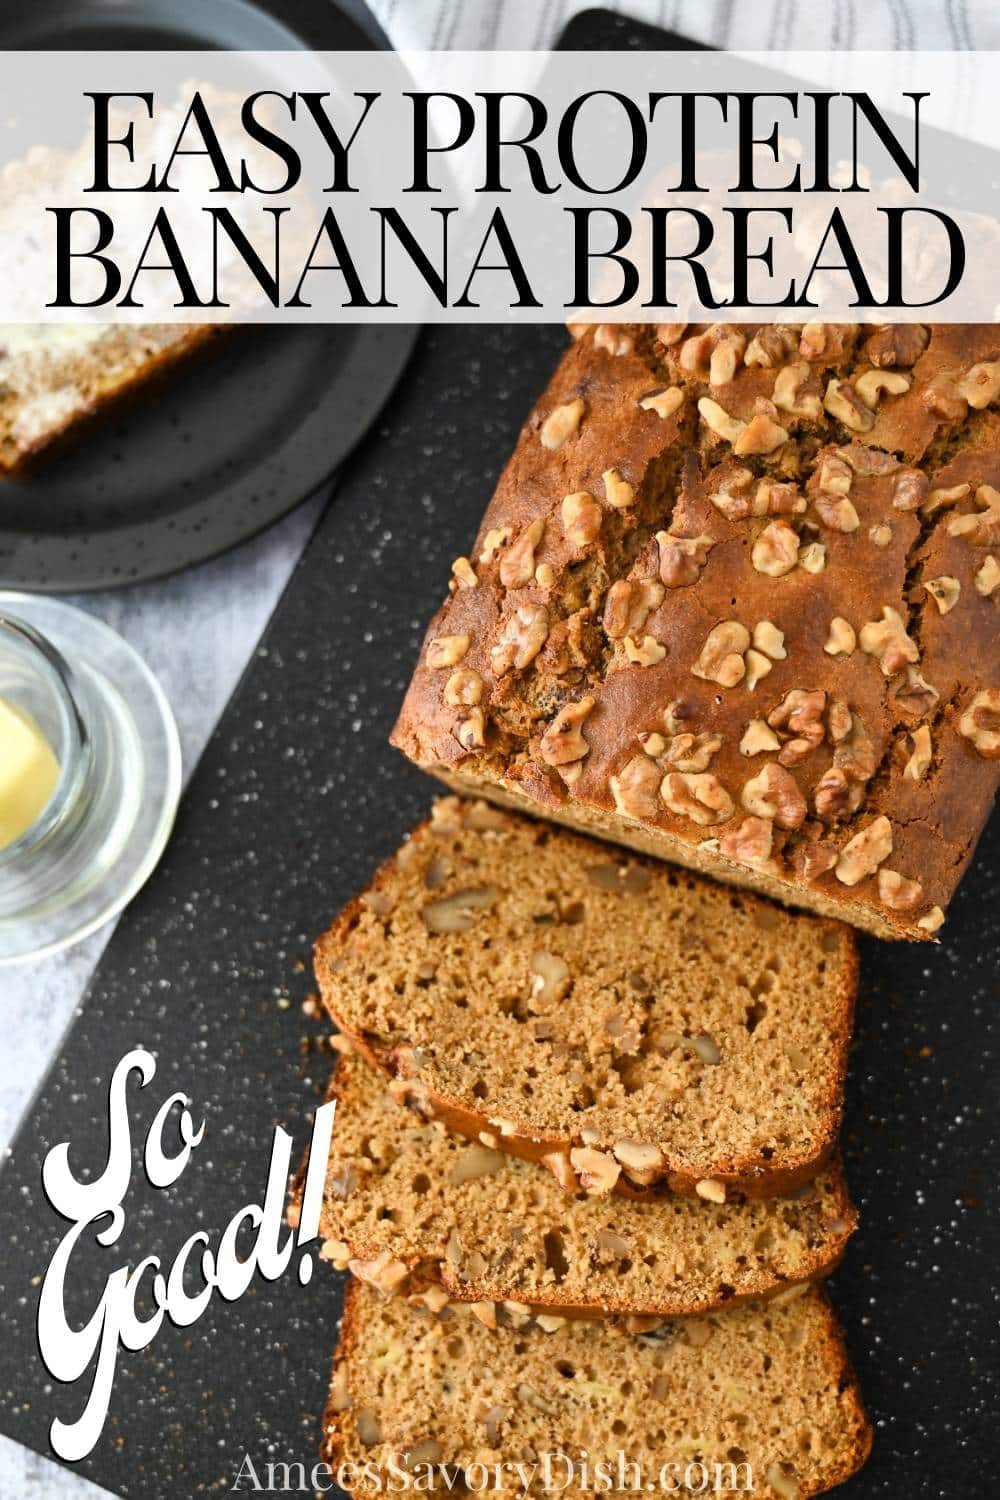 This flavorful Protein Banana Bread is incredibly delicious with 100% whole grains and about 10 grams of protein per slice! via @Ameessavorydish